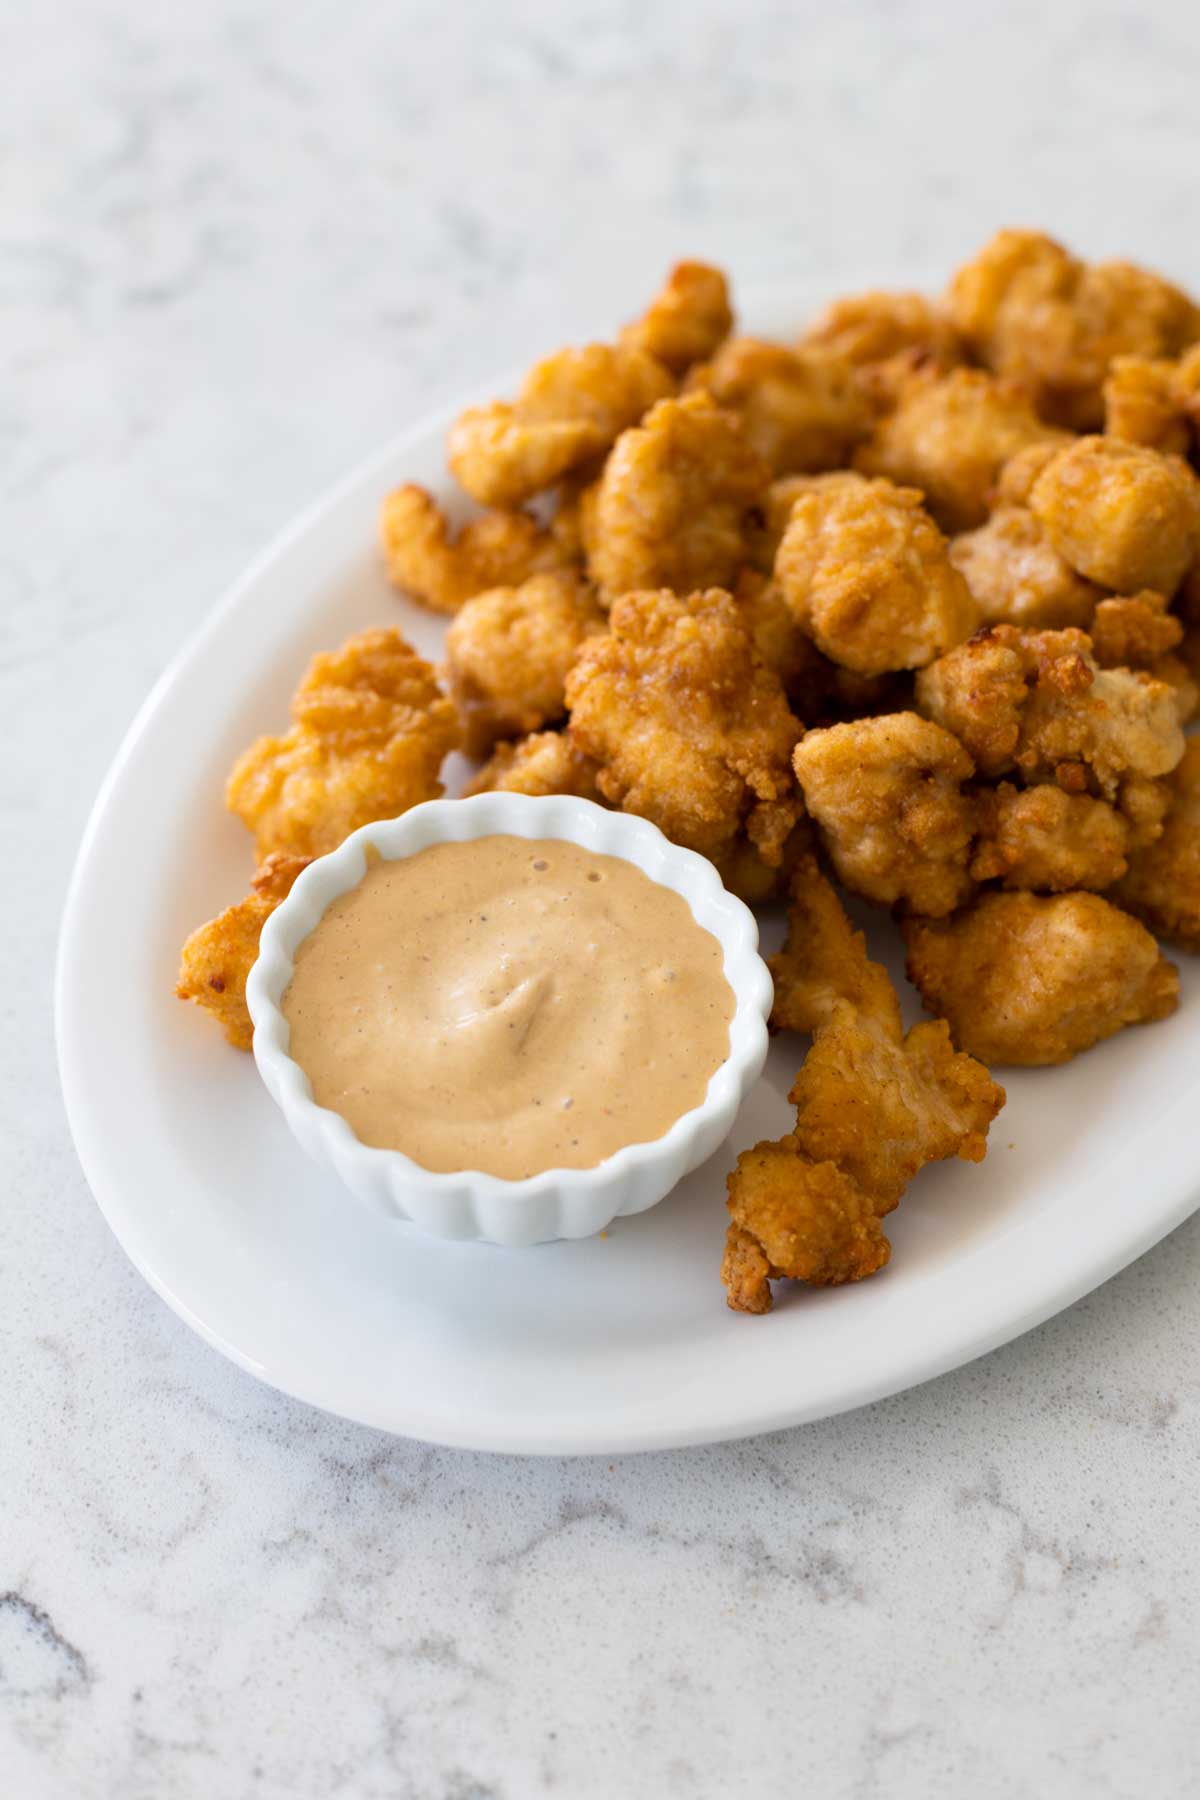 The sauce is in a cup on a platter of chicken nuggets.